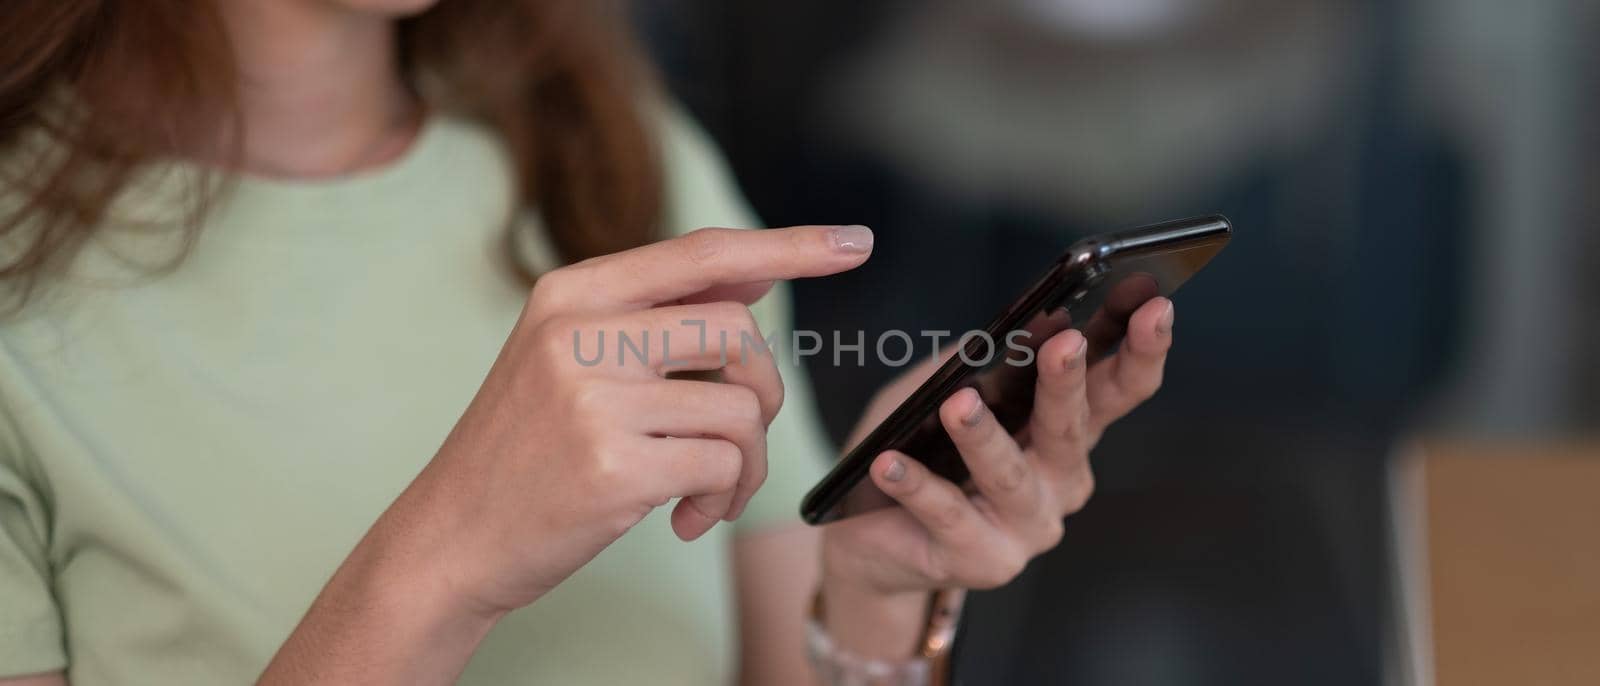 point finger on screen mobile phone closeup, person texting text message girls using in hands cellphone close up, online internet